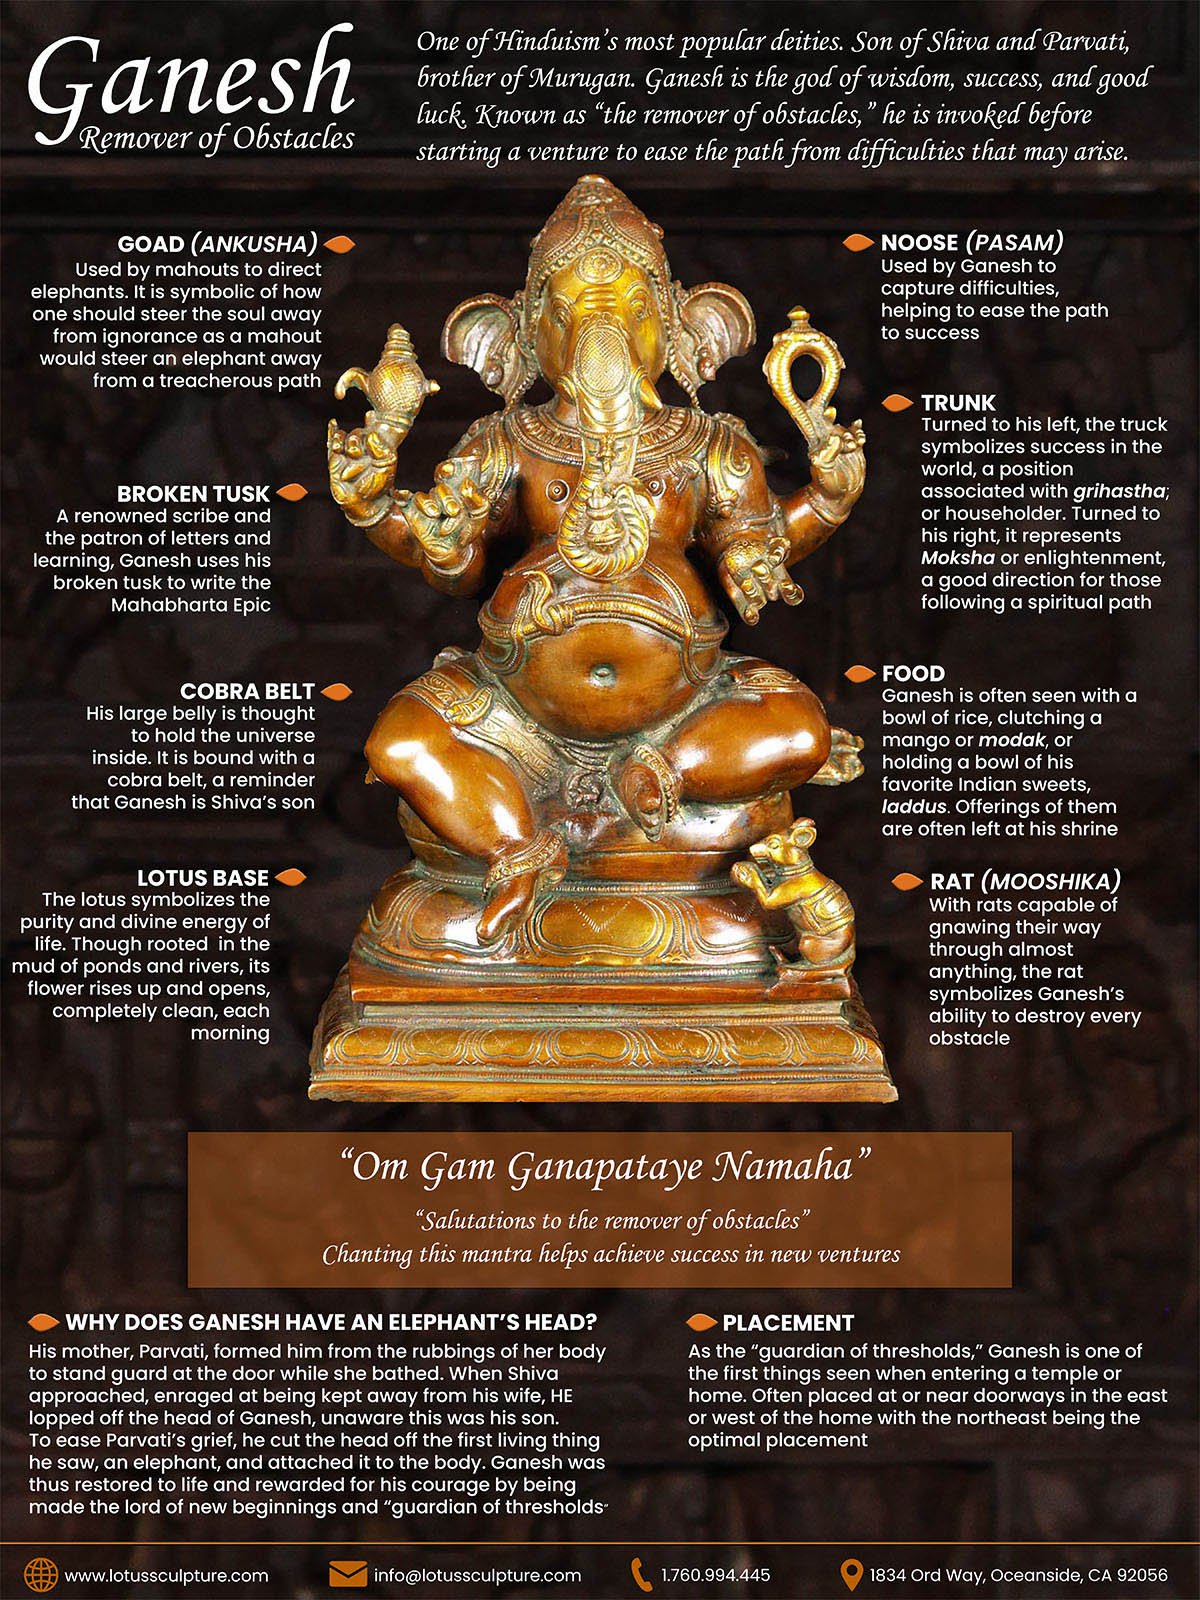 God ElephantLord Of Removing Obstacles God Of Intellect Wisdom Ganesha